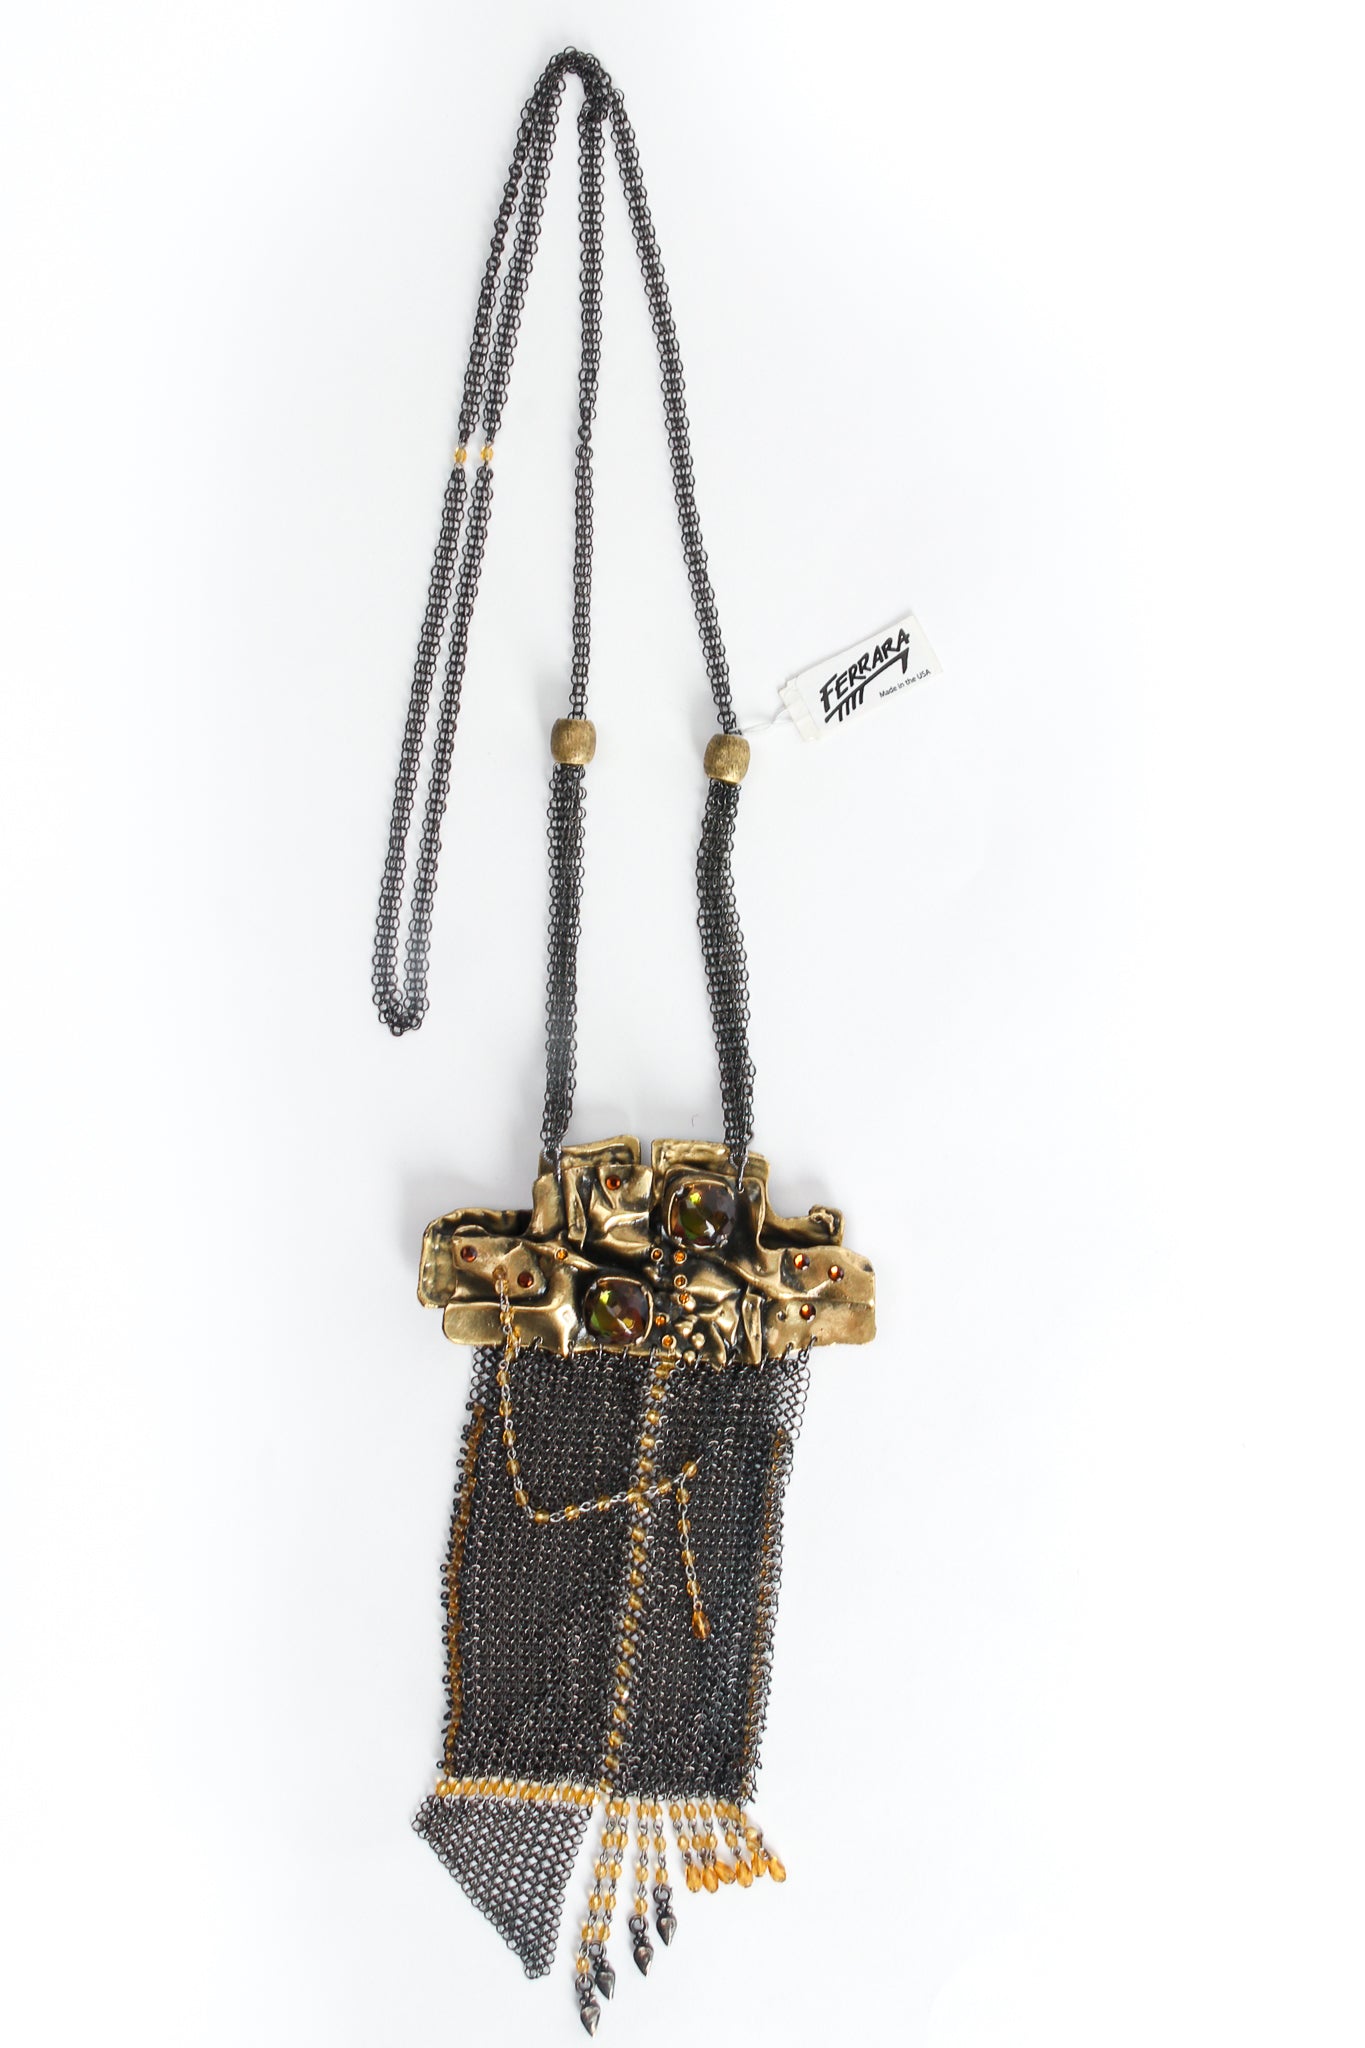 Vintage Anthony Ferrara Brutalist Plated Brass Mesh Micro Phone Bag at Recess Los Angeles